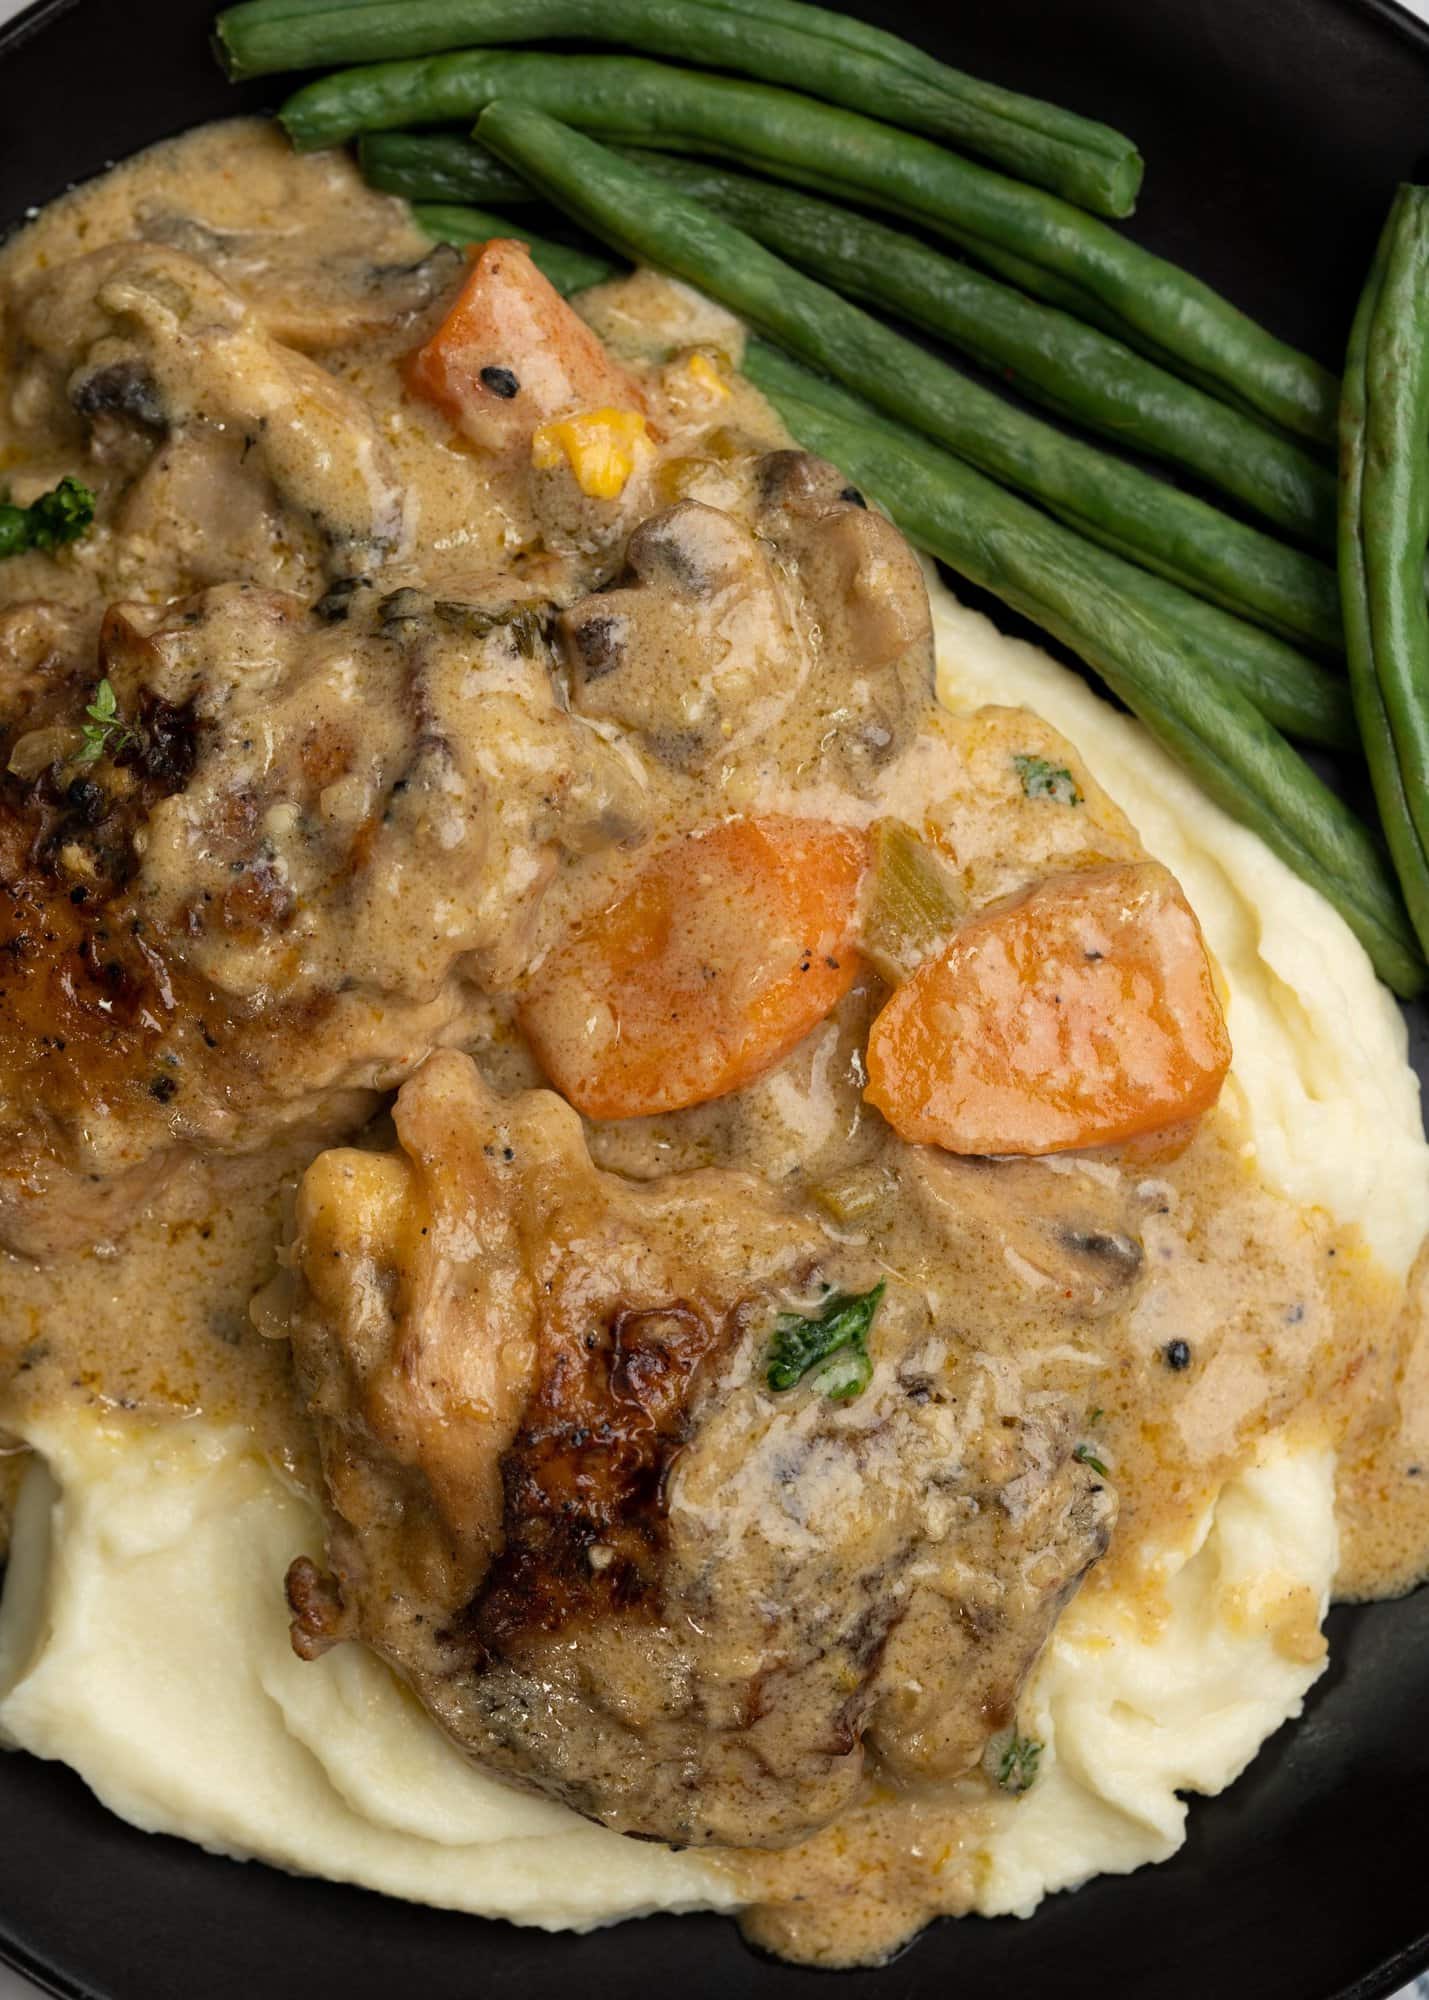 Seared chicken pieces and sauce from fricassee with carrots served on a bed of mashed potato and served with sauteed green beens. 